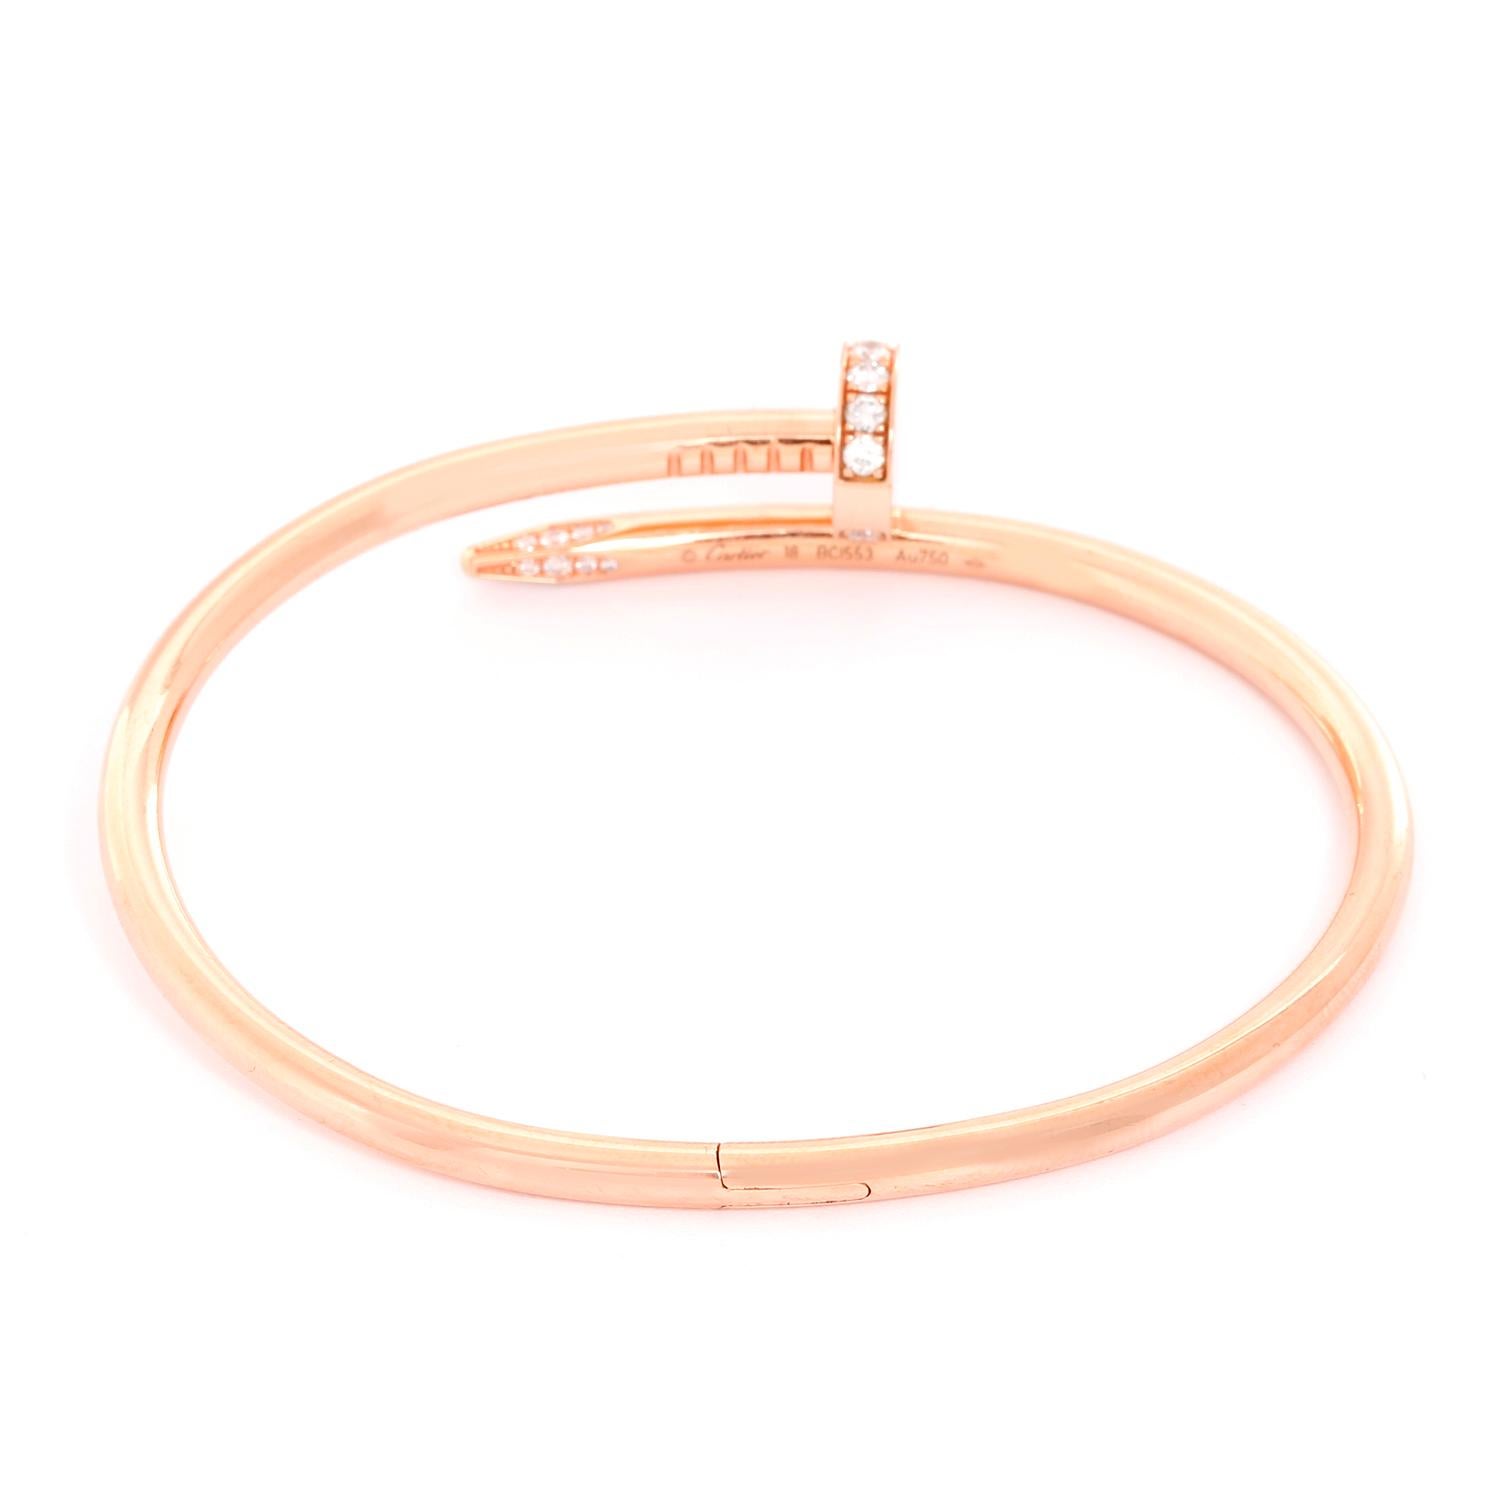 Cartier Juste un Clou 18k Pink Gold and Pave Diamond Bracelet Size 18 - This bracelet is a part of the Juste un Clou Collection and features pave diamonds set in 18k pink gold. Signed Cartier 18 BCI553  Au750. Size 18. Total weight is 31.0 grams.